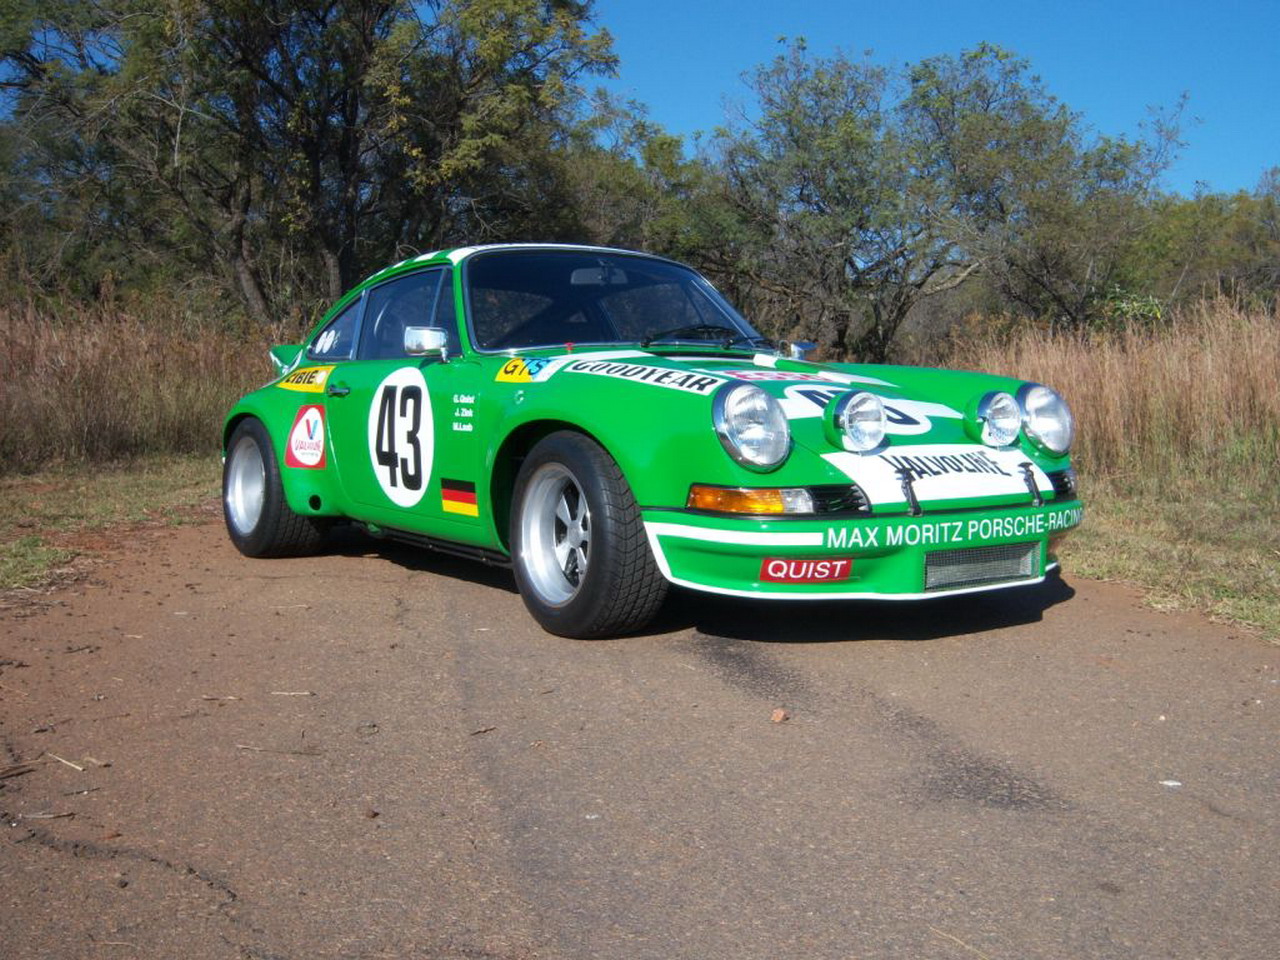 1973 RSR  sn 911.360.0636 with newly applied livery - Photo 3